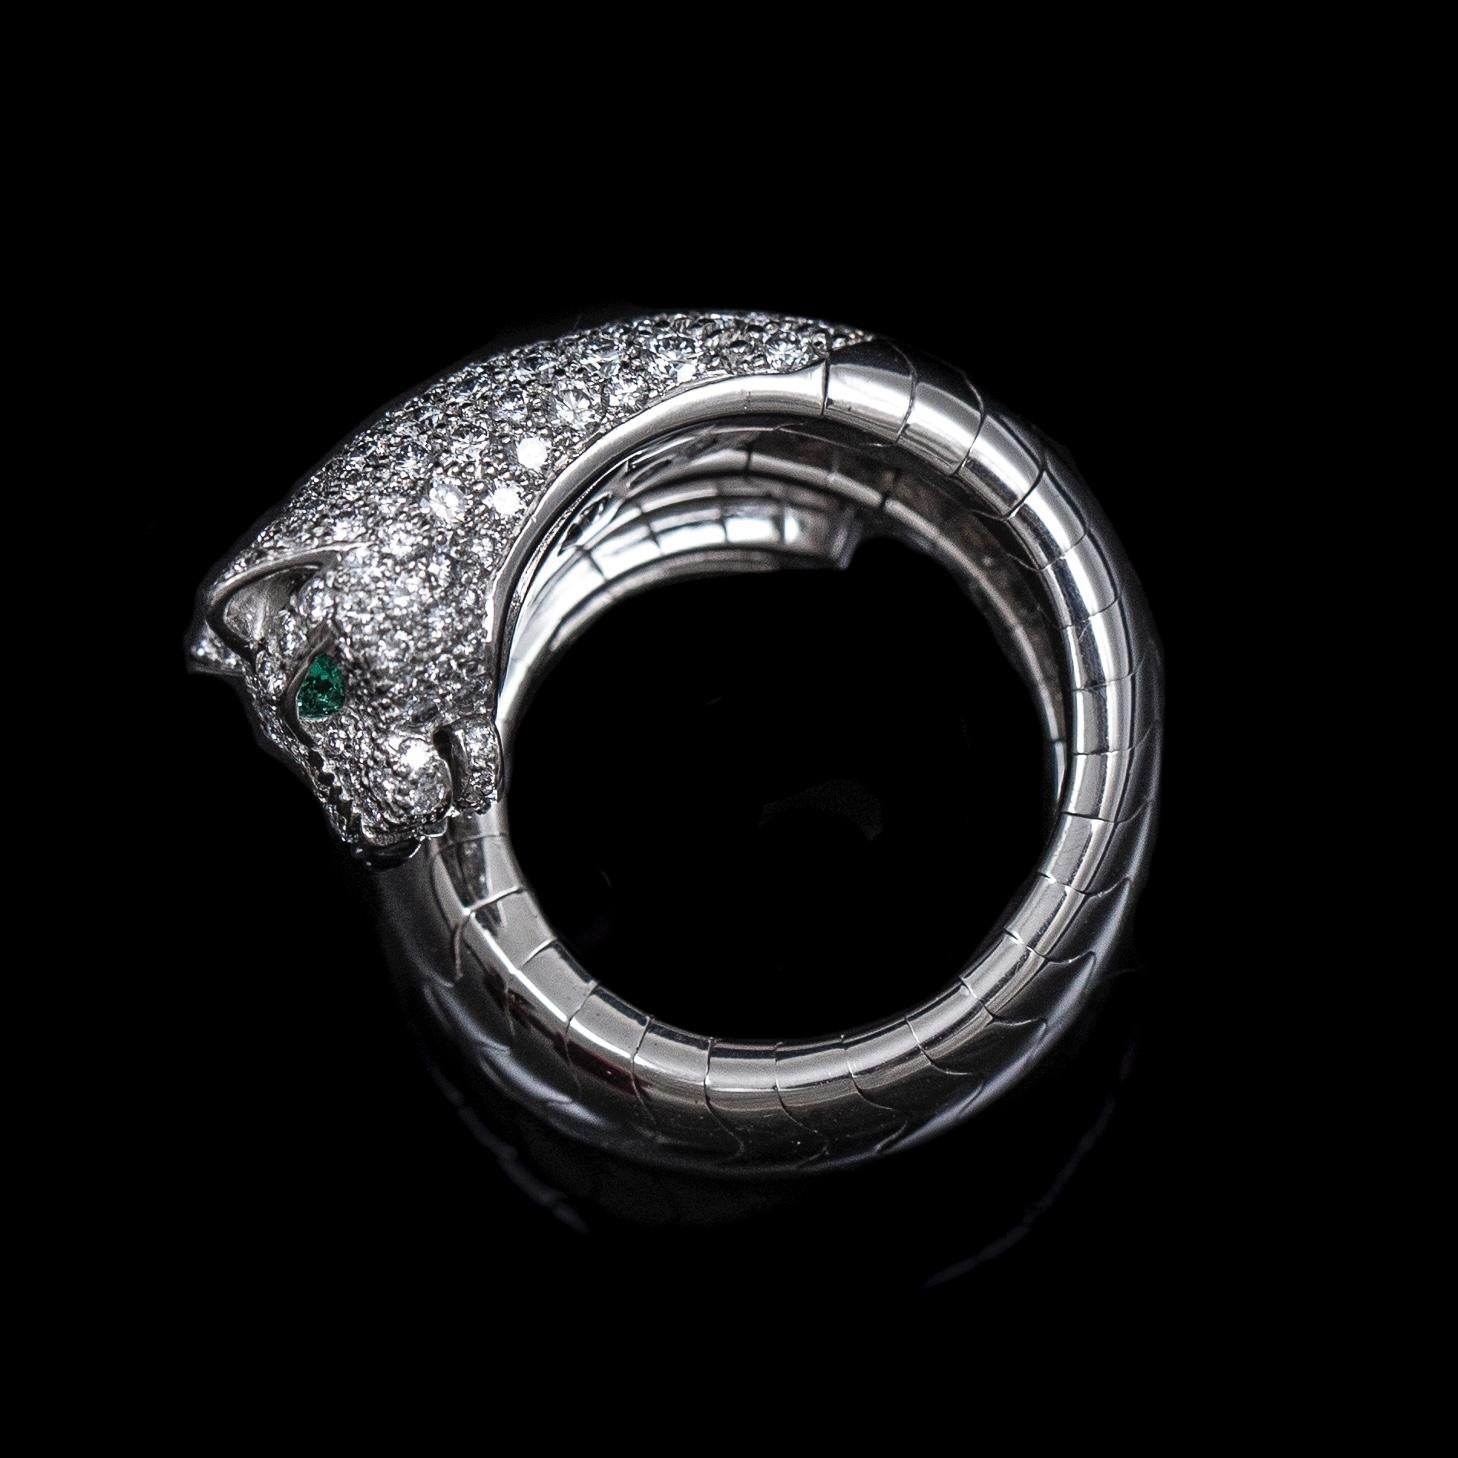 Cartier La Calda Panthère Panther Diamond Emerald Onyx Cocktail Ring White Gold In Good Condition For Sale In Lisbon, PT